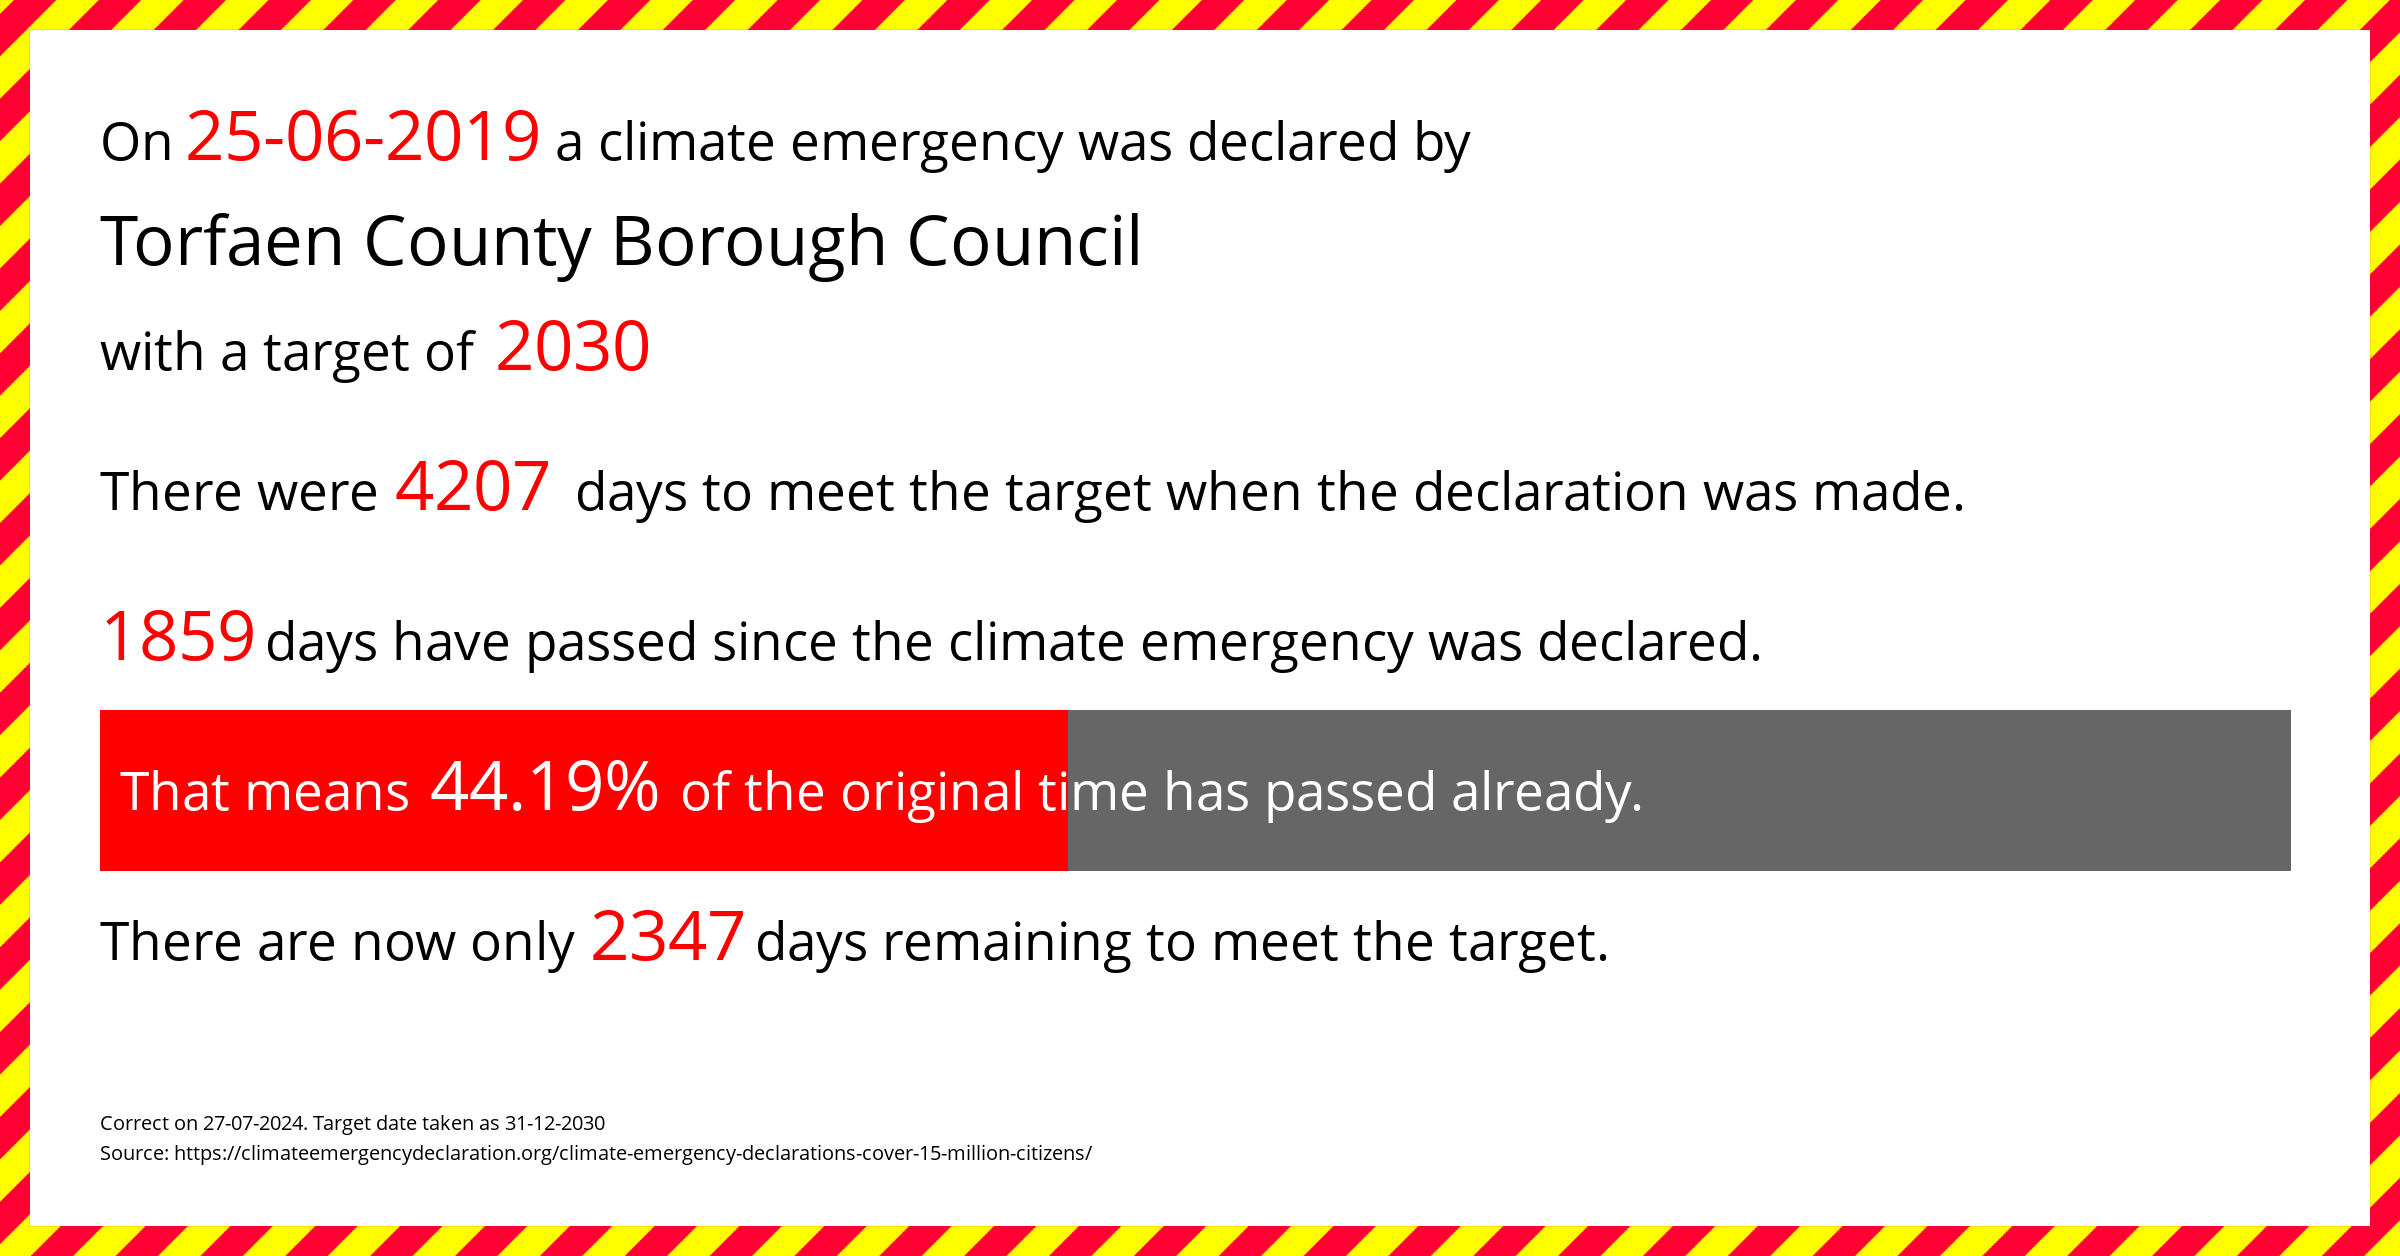 Torfaen County Borough Council declared a Climate emergency on Tuesday 25th June 2019, with a target of 2030.